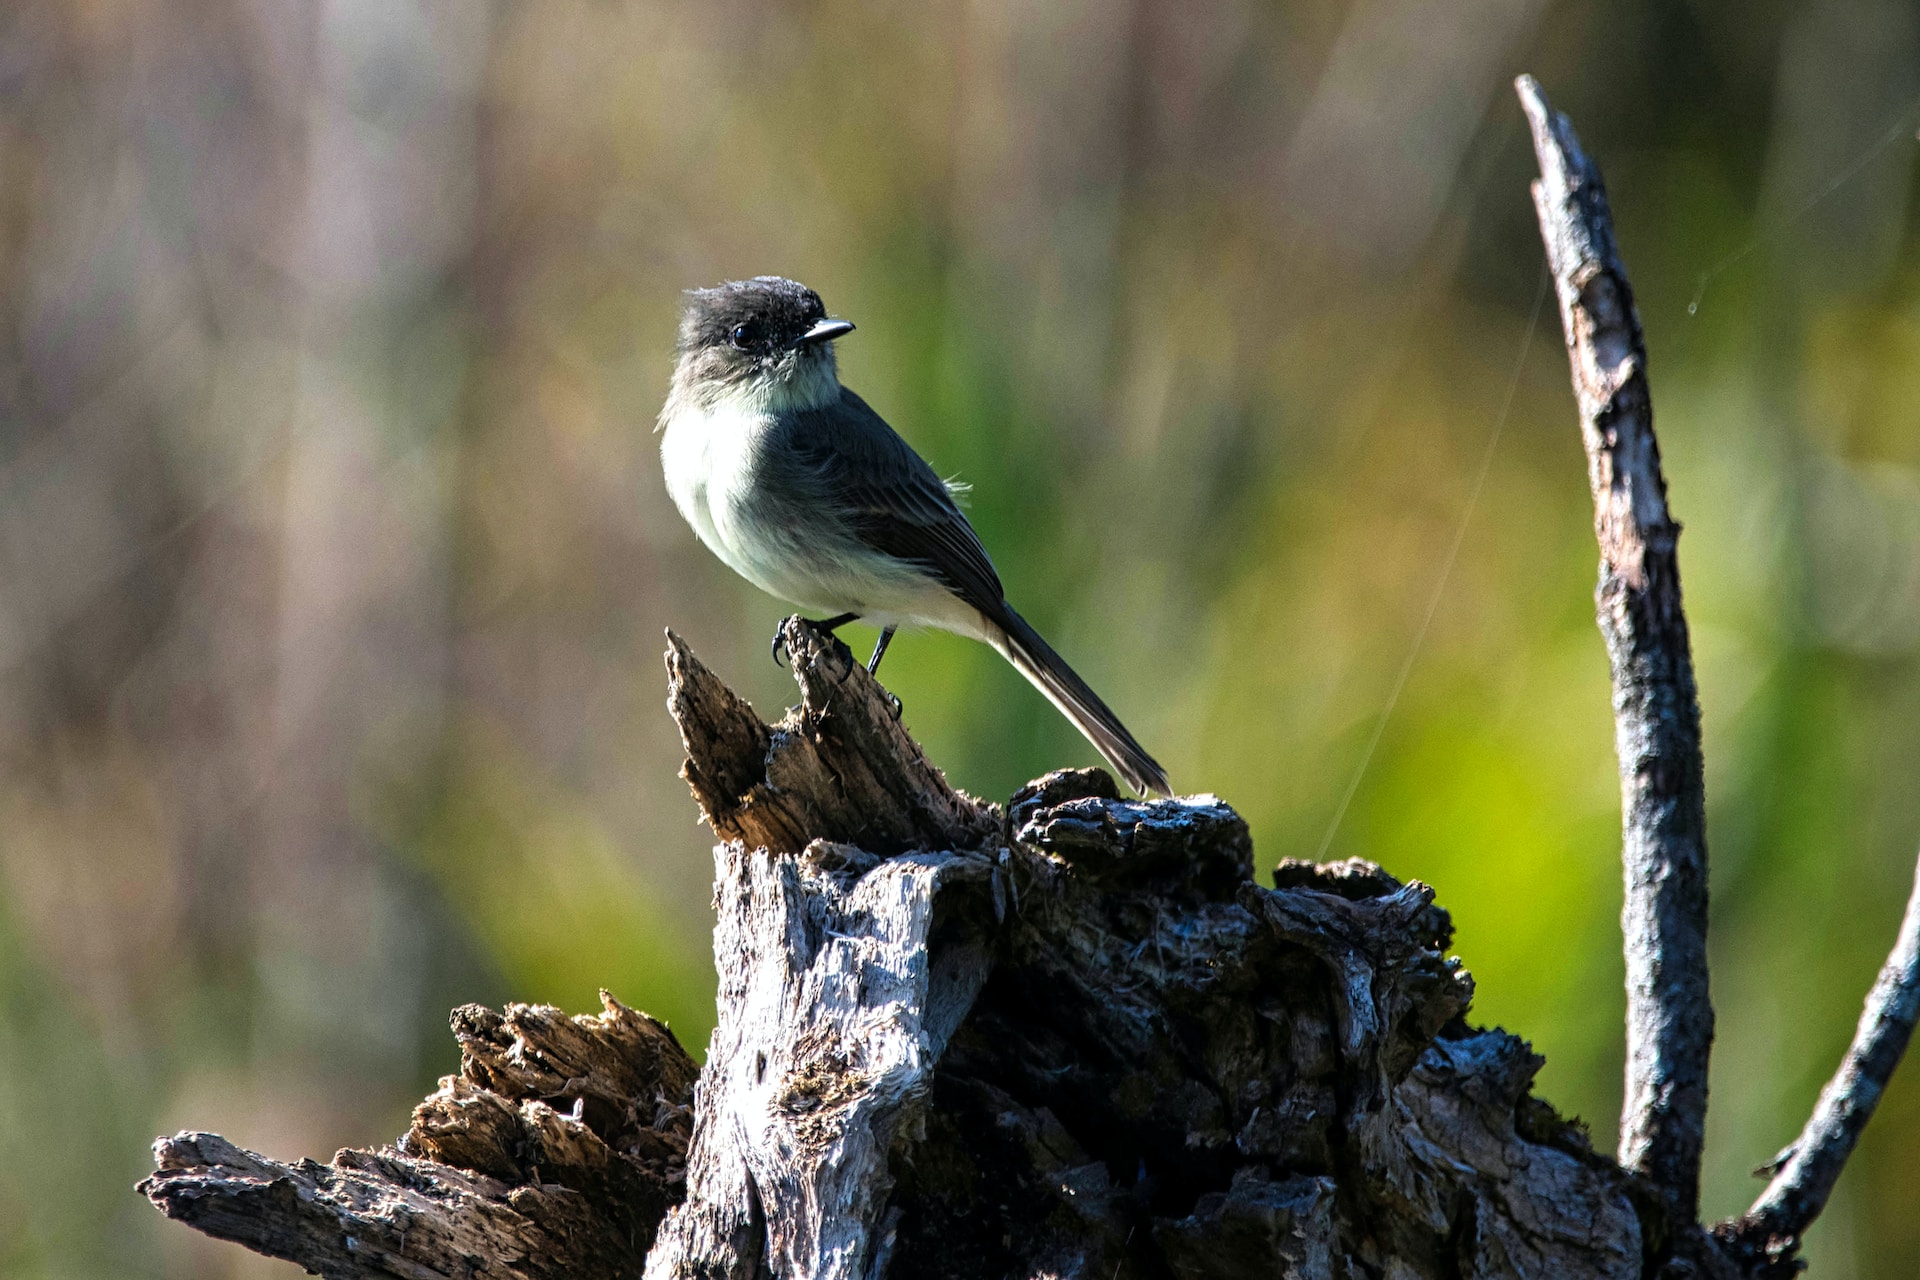 An eastern phoebe sitting on a tree stomp